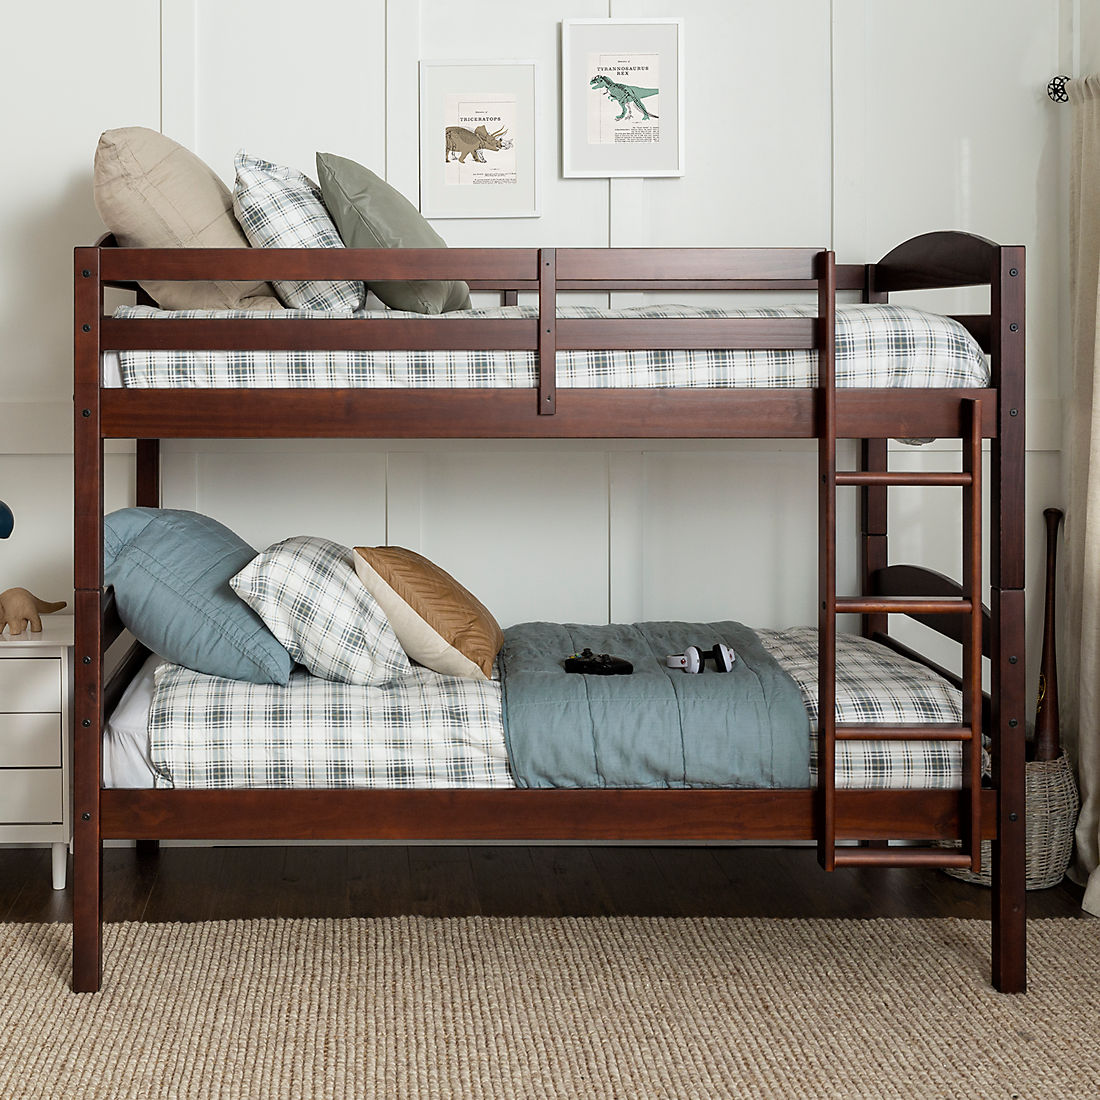 W Trends Twin Size Solid Wood Bunk Bed, Berkley Jensen Twin Size Bunk Bed With Trundle